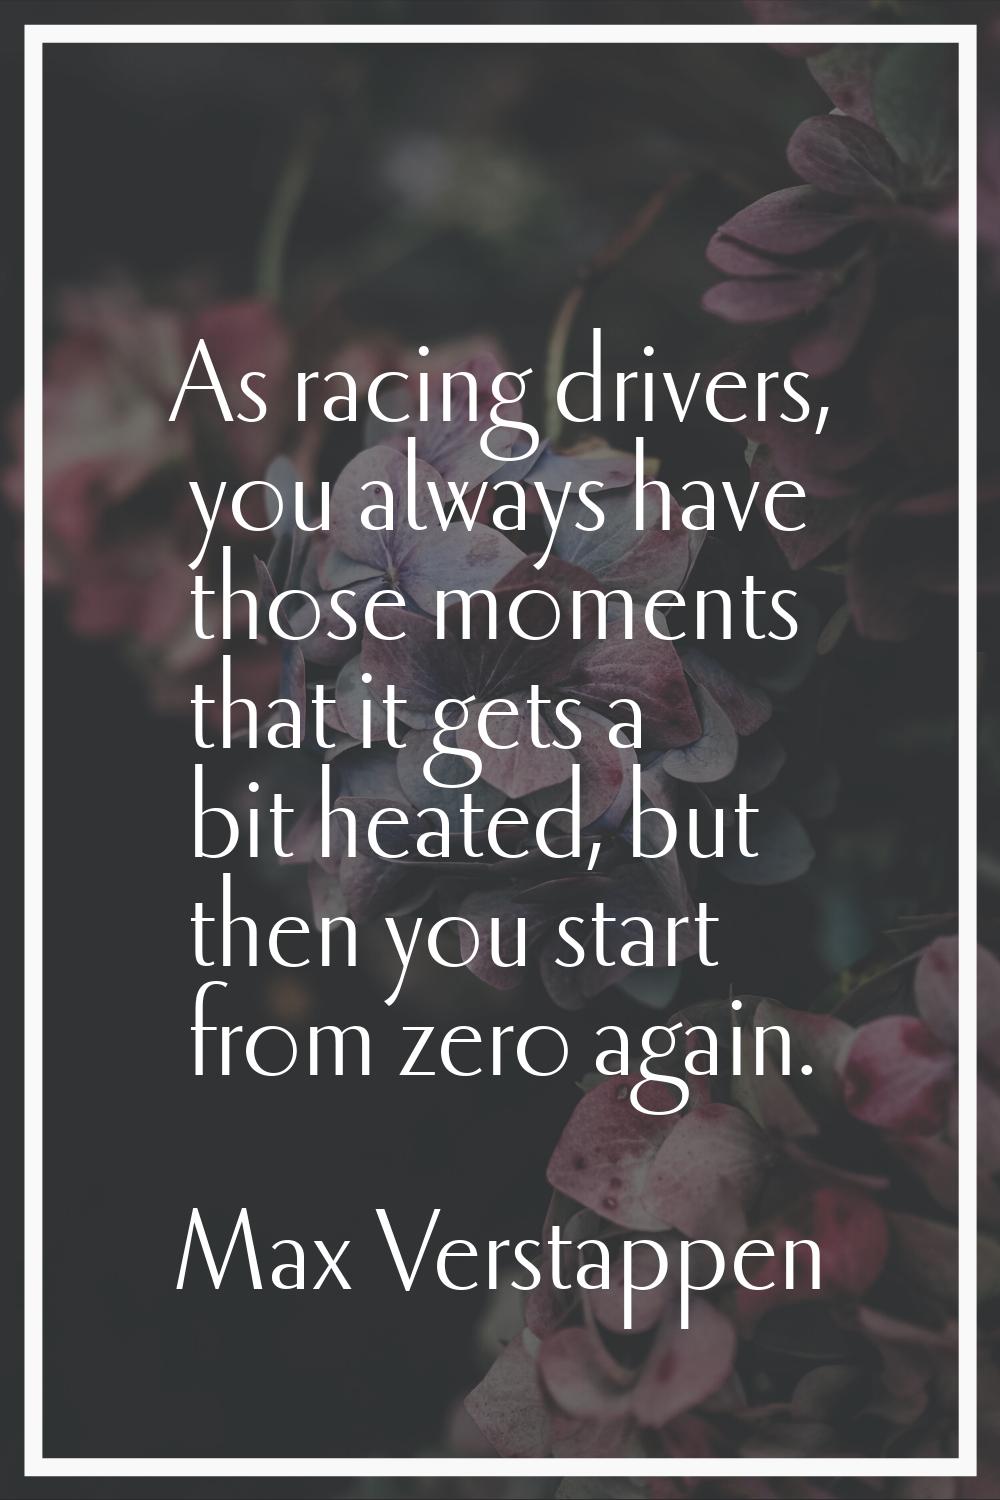 As racing drivers, you always have those moments that it gets a bit heated, but then you start from